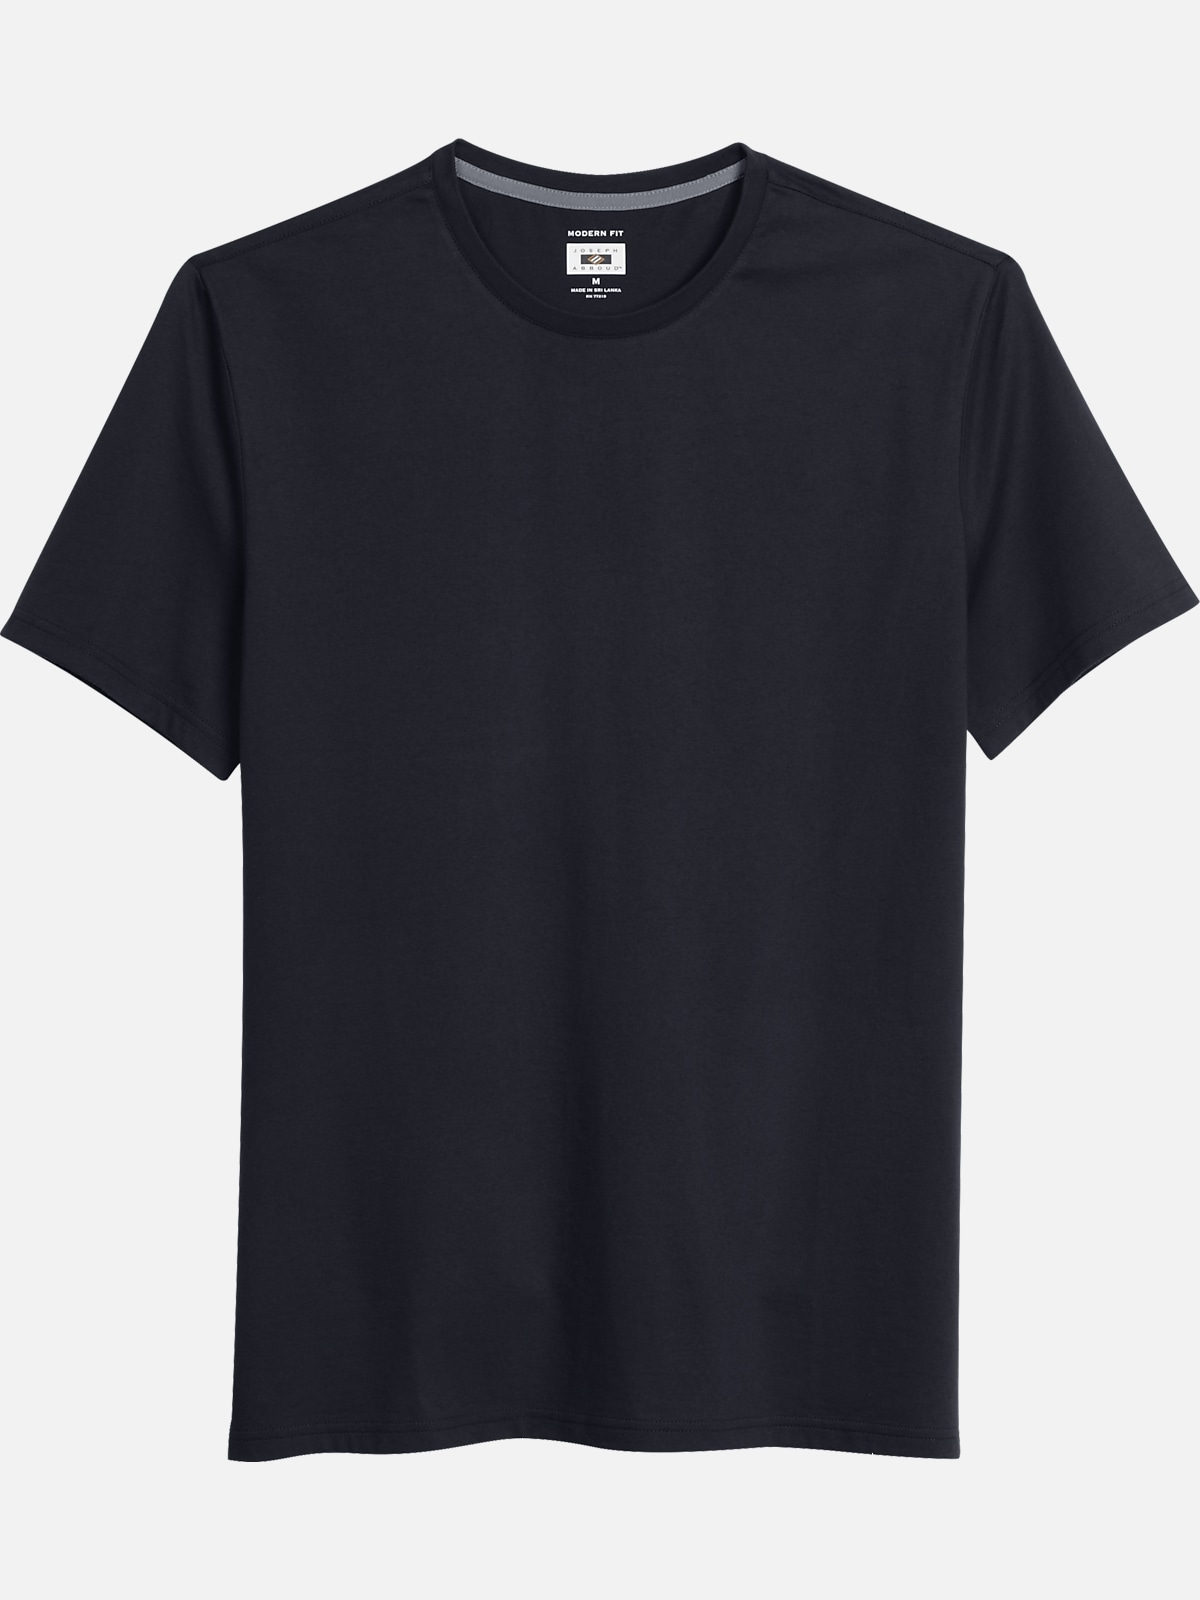 Joseph Abboud Modern Fit Luxe Cotton Crew Neck Tee | All Clearance $39. ...